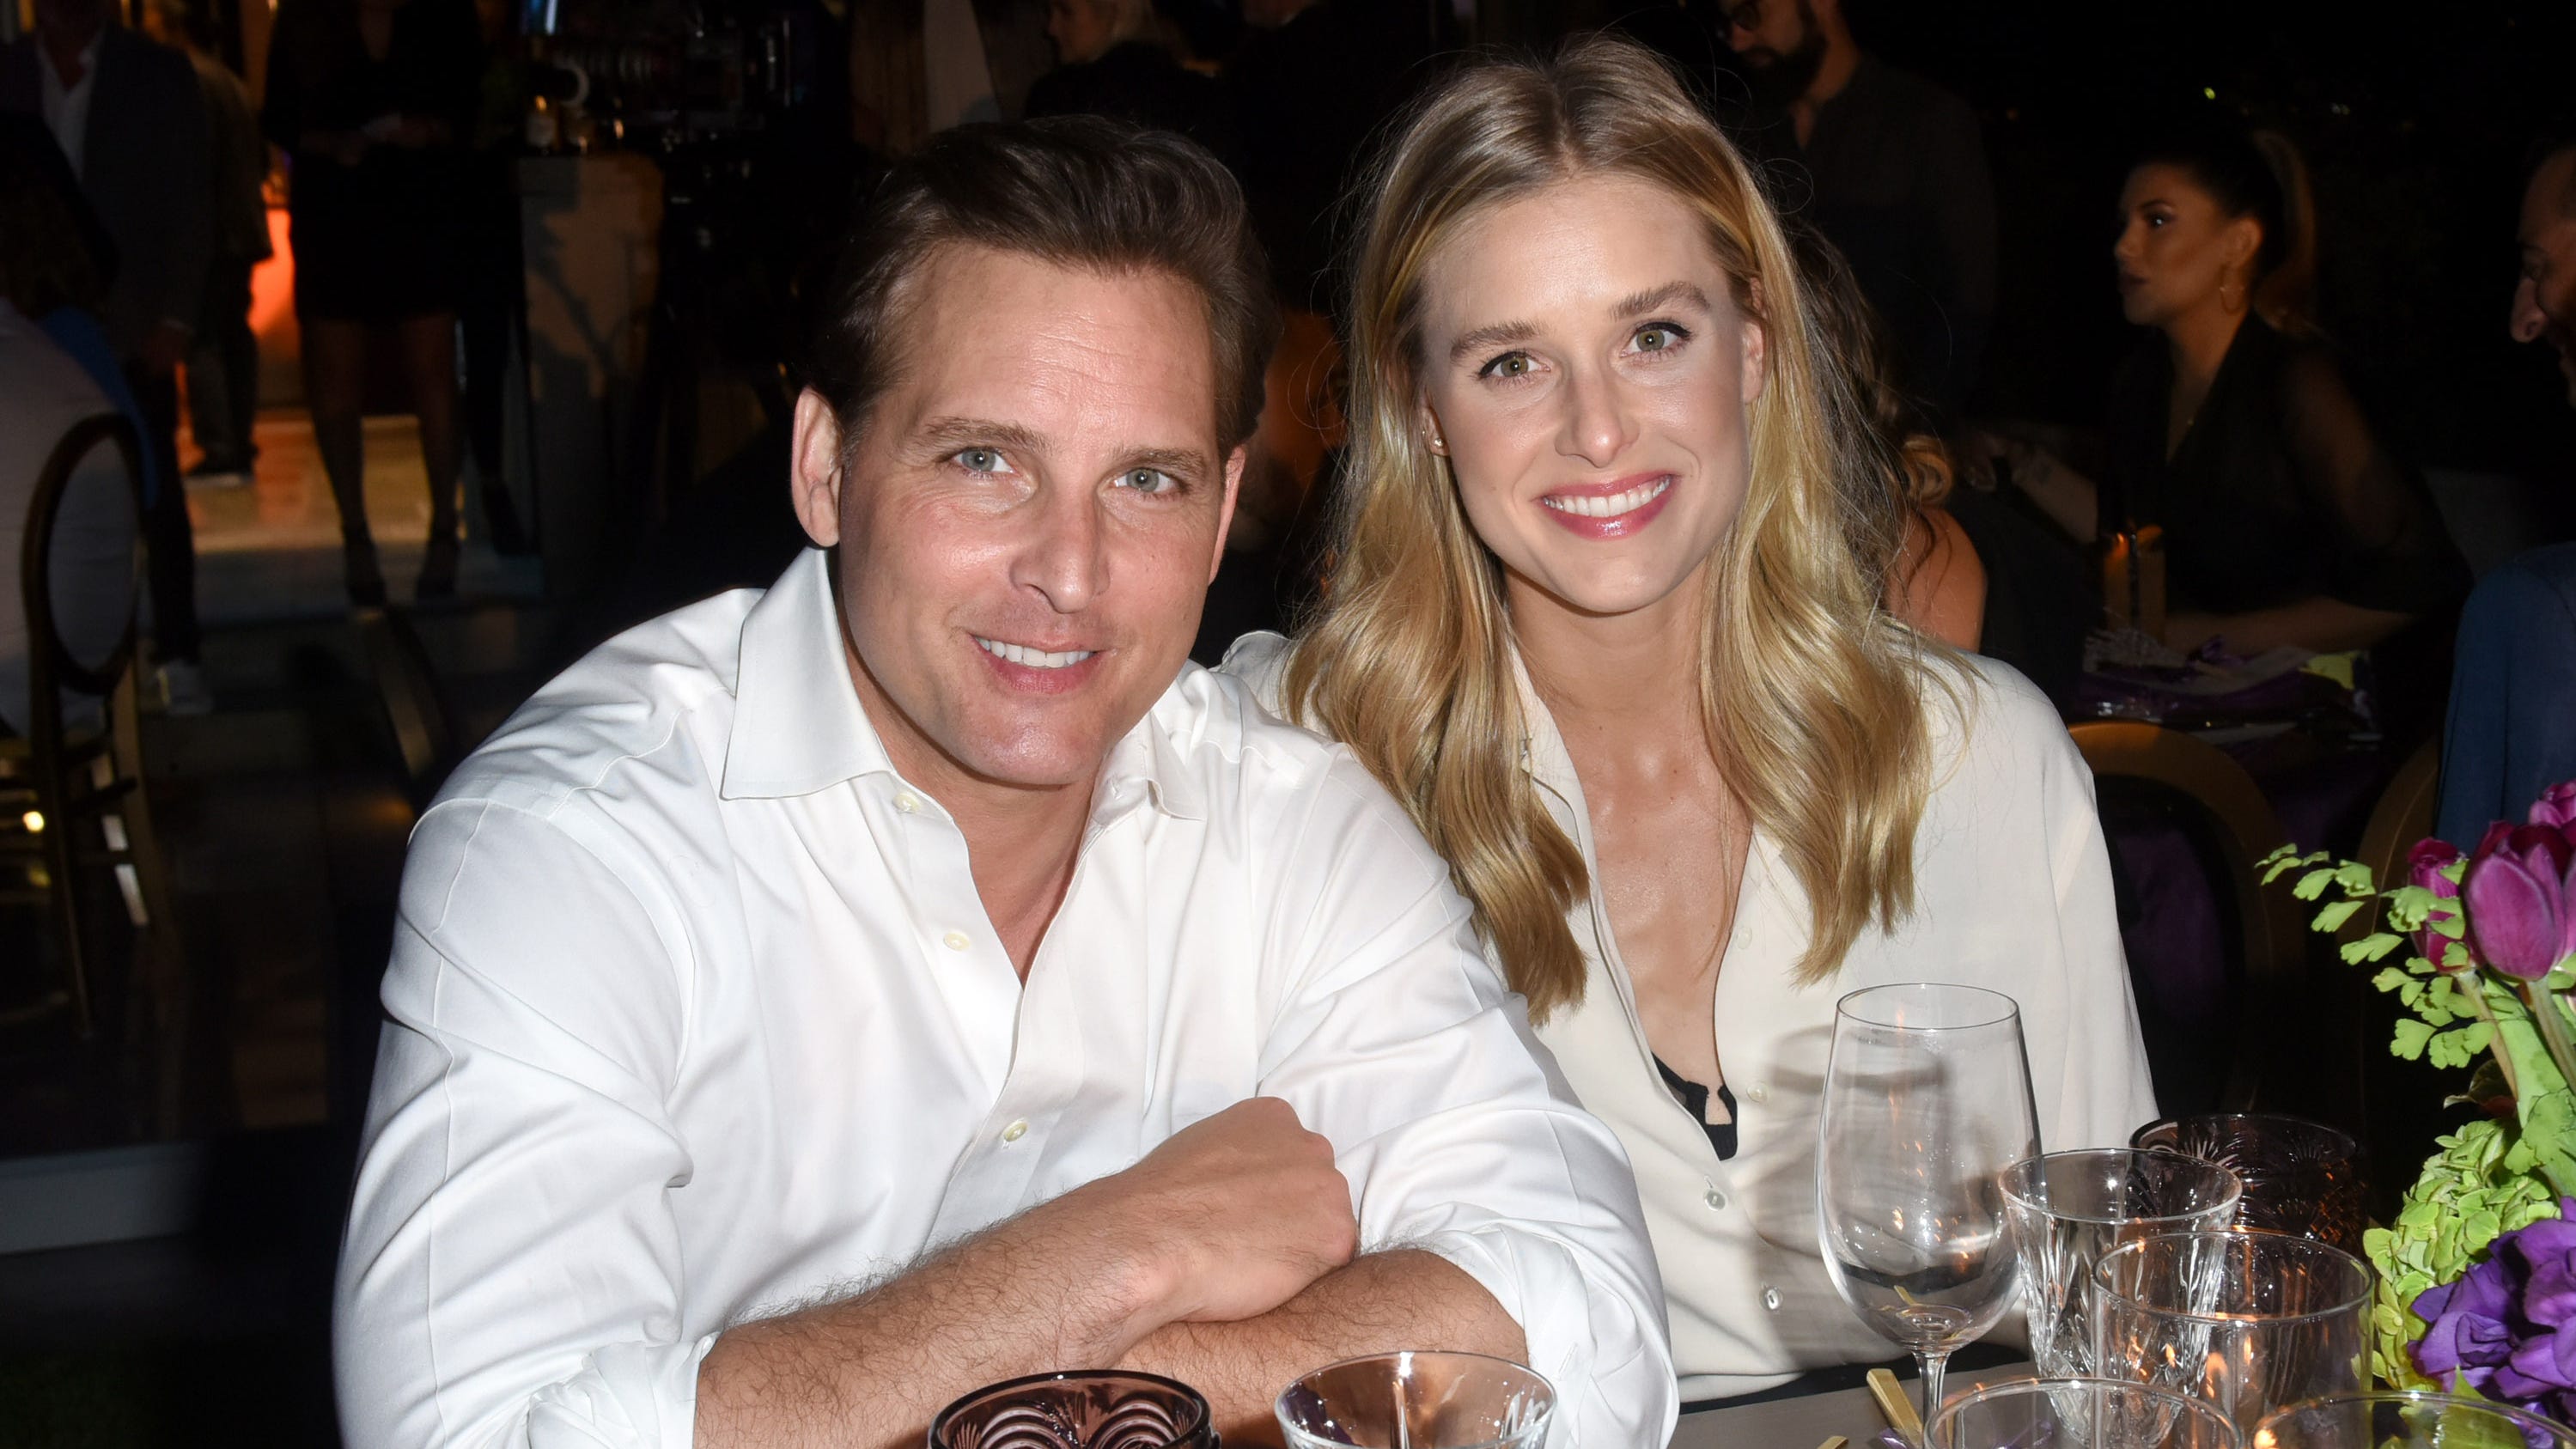 'Twilight' actor Peter Facinelli engaged to model Lily Anne Harrison